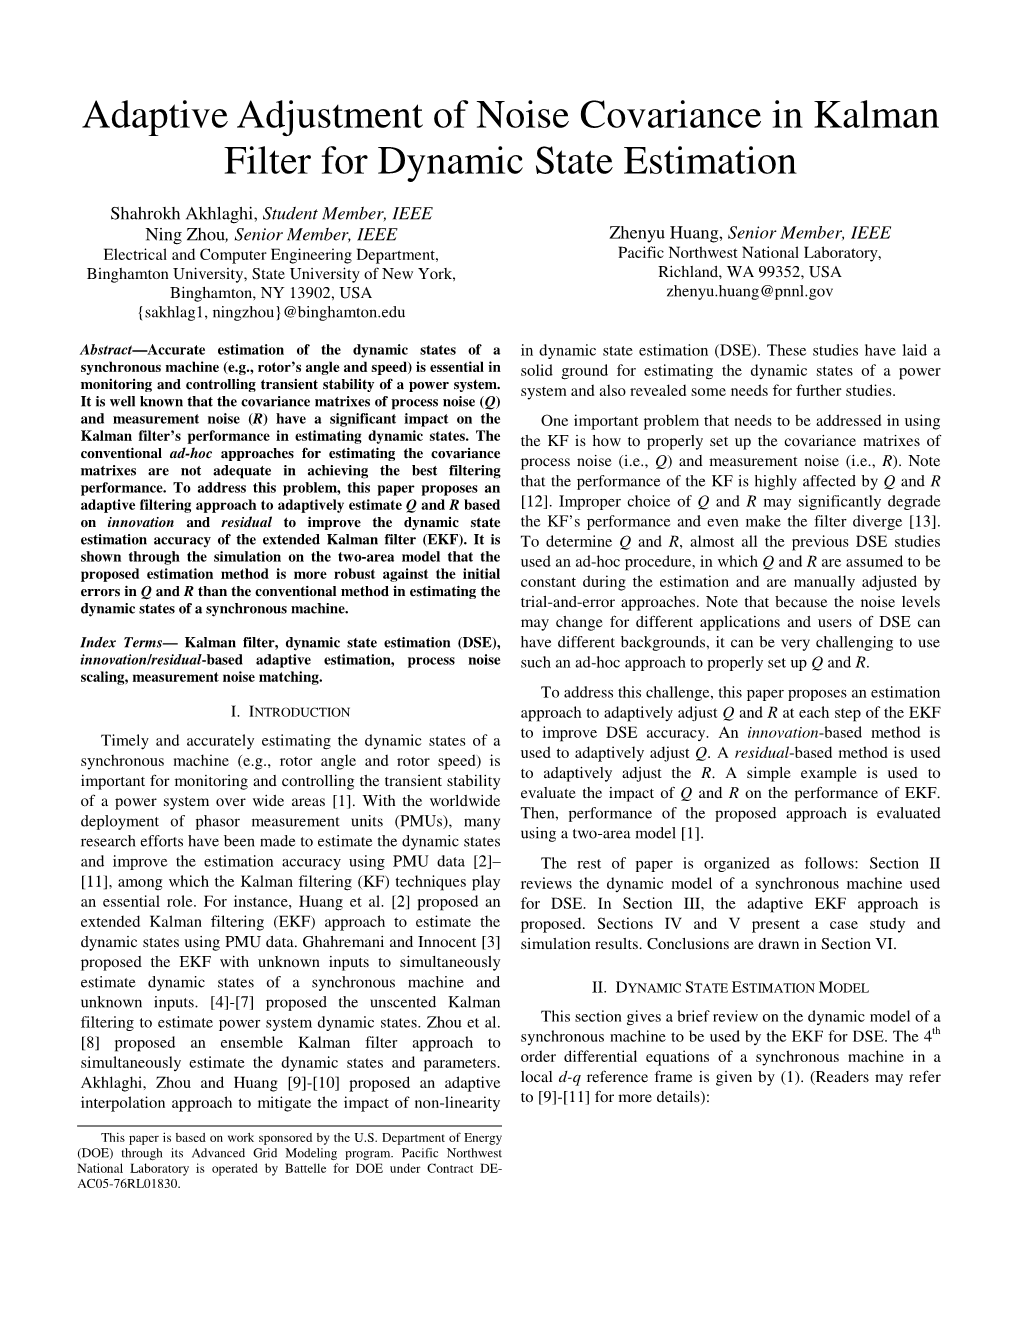 Adaptive Adjustment of Noise Covariance in Kalman Filter for Dynamic State Estimation